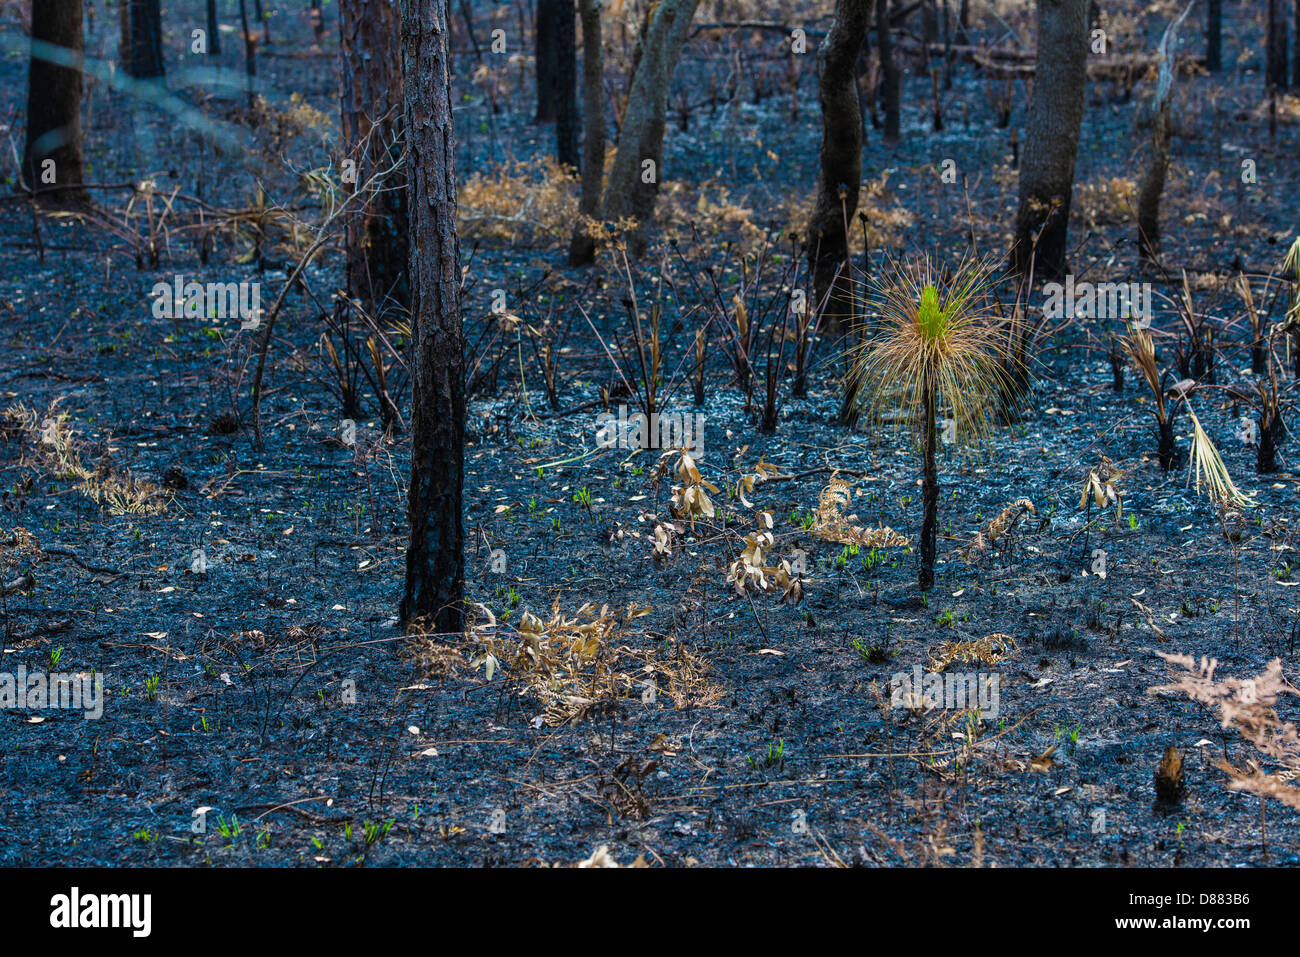 Life After Death, A pine seedling spouting up from the ashes after a fire swept through this forest. Stock Photo